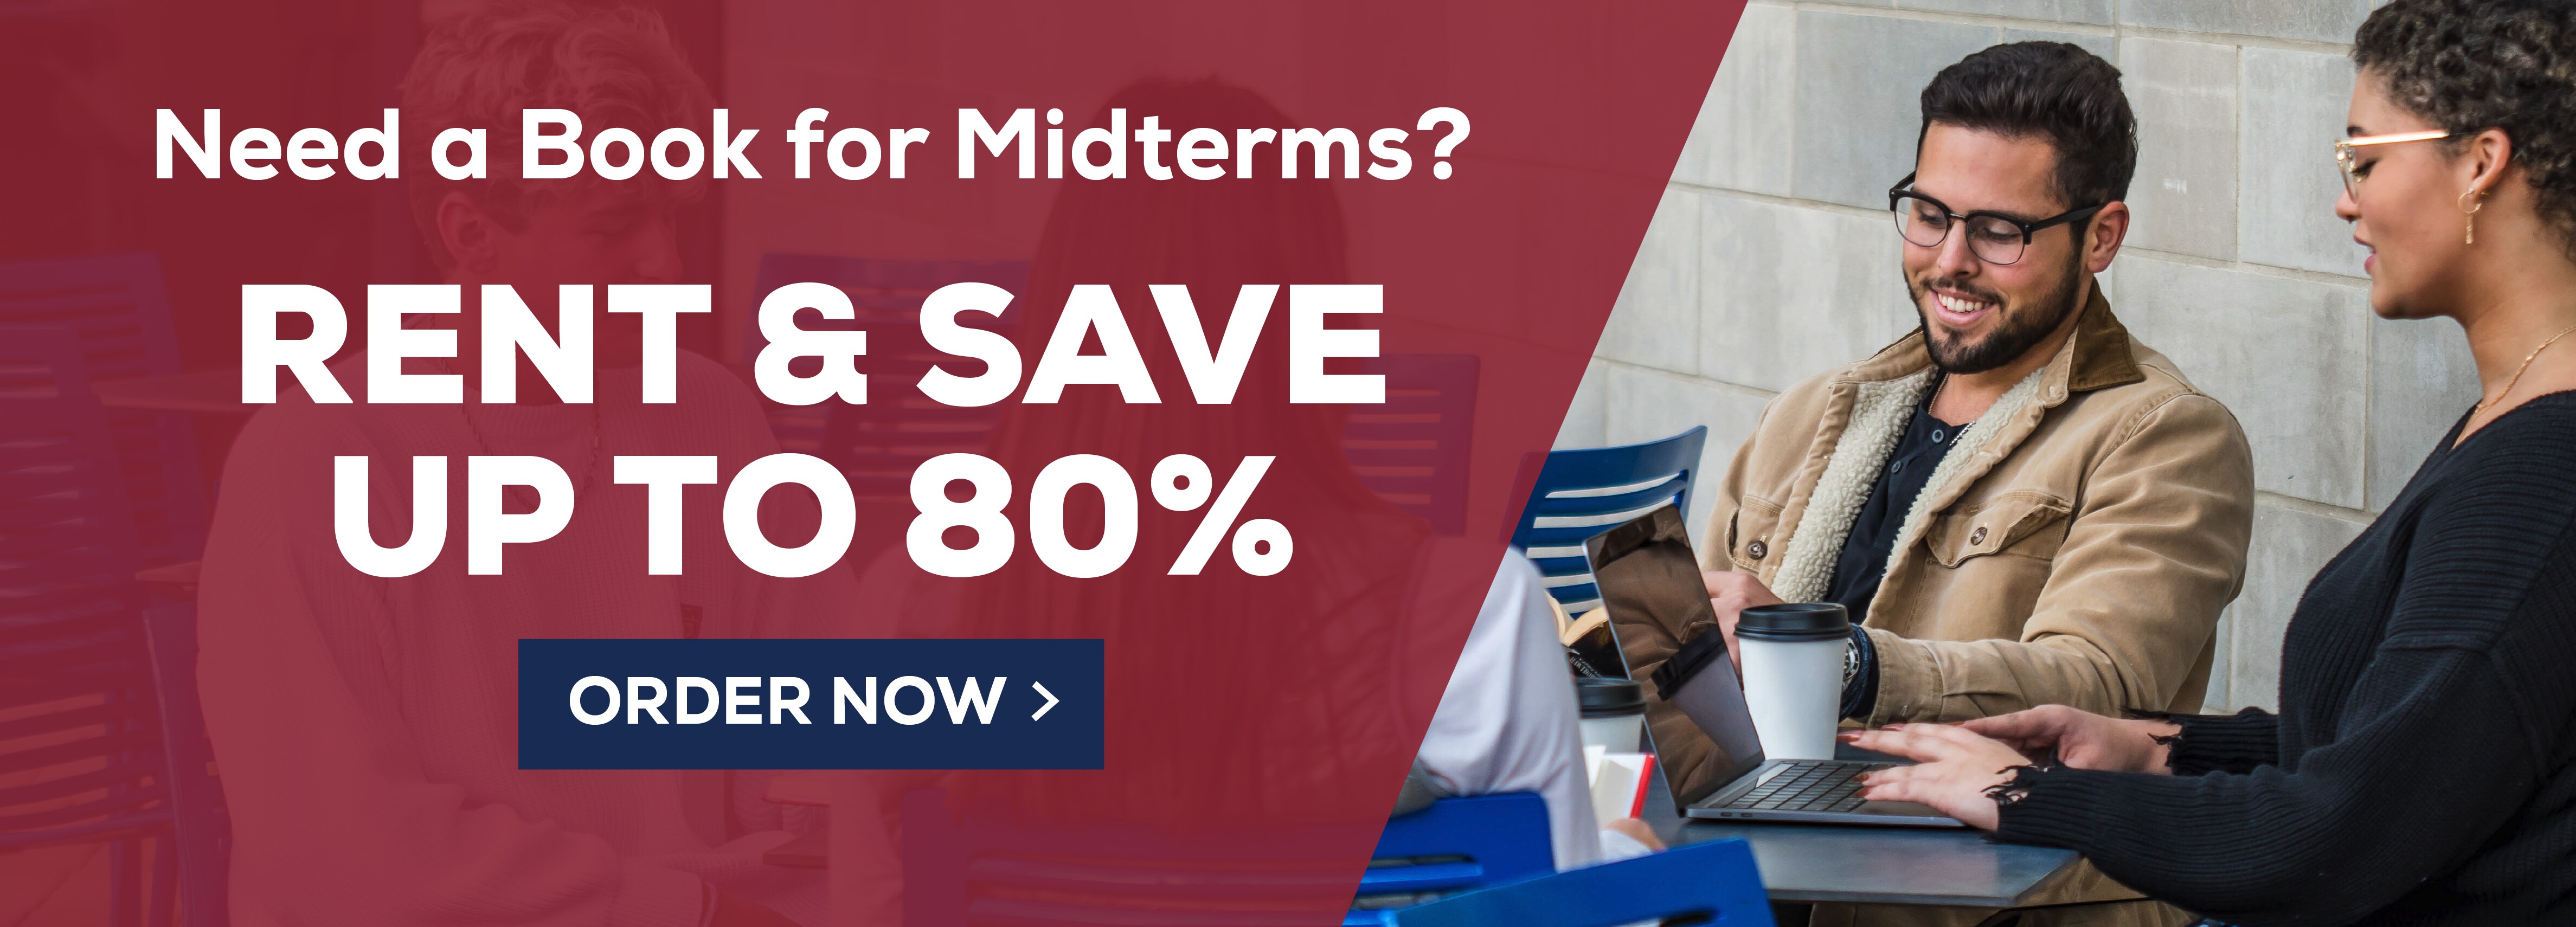 Need a book for midterms? Rent and save up to 80%! Order Now.